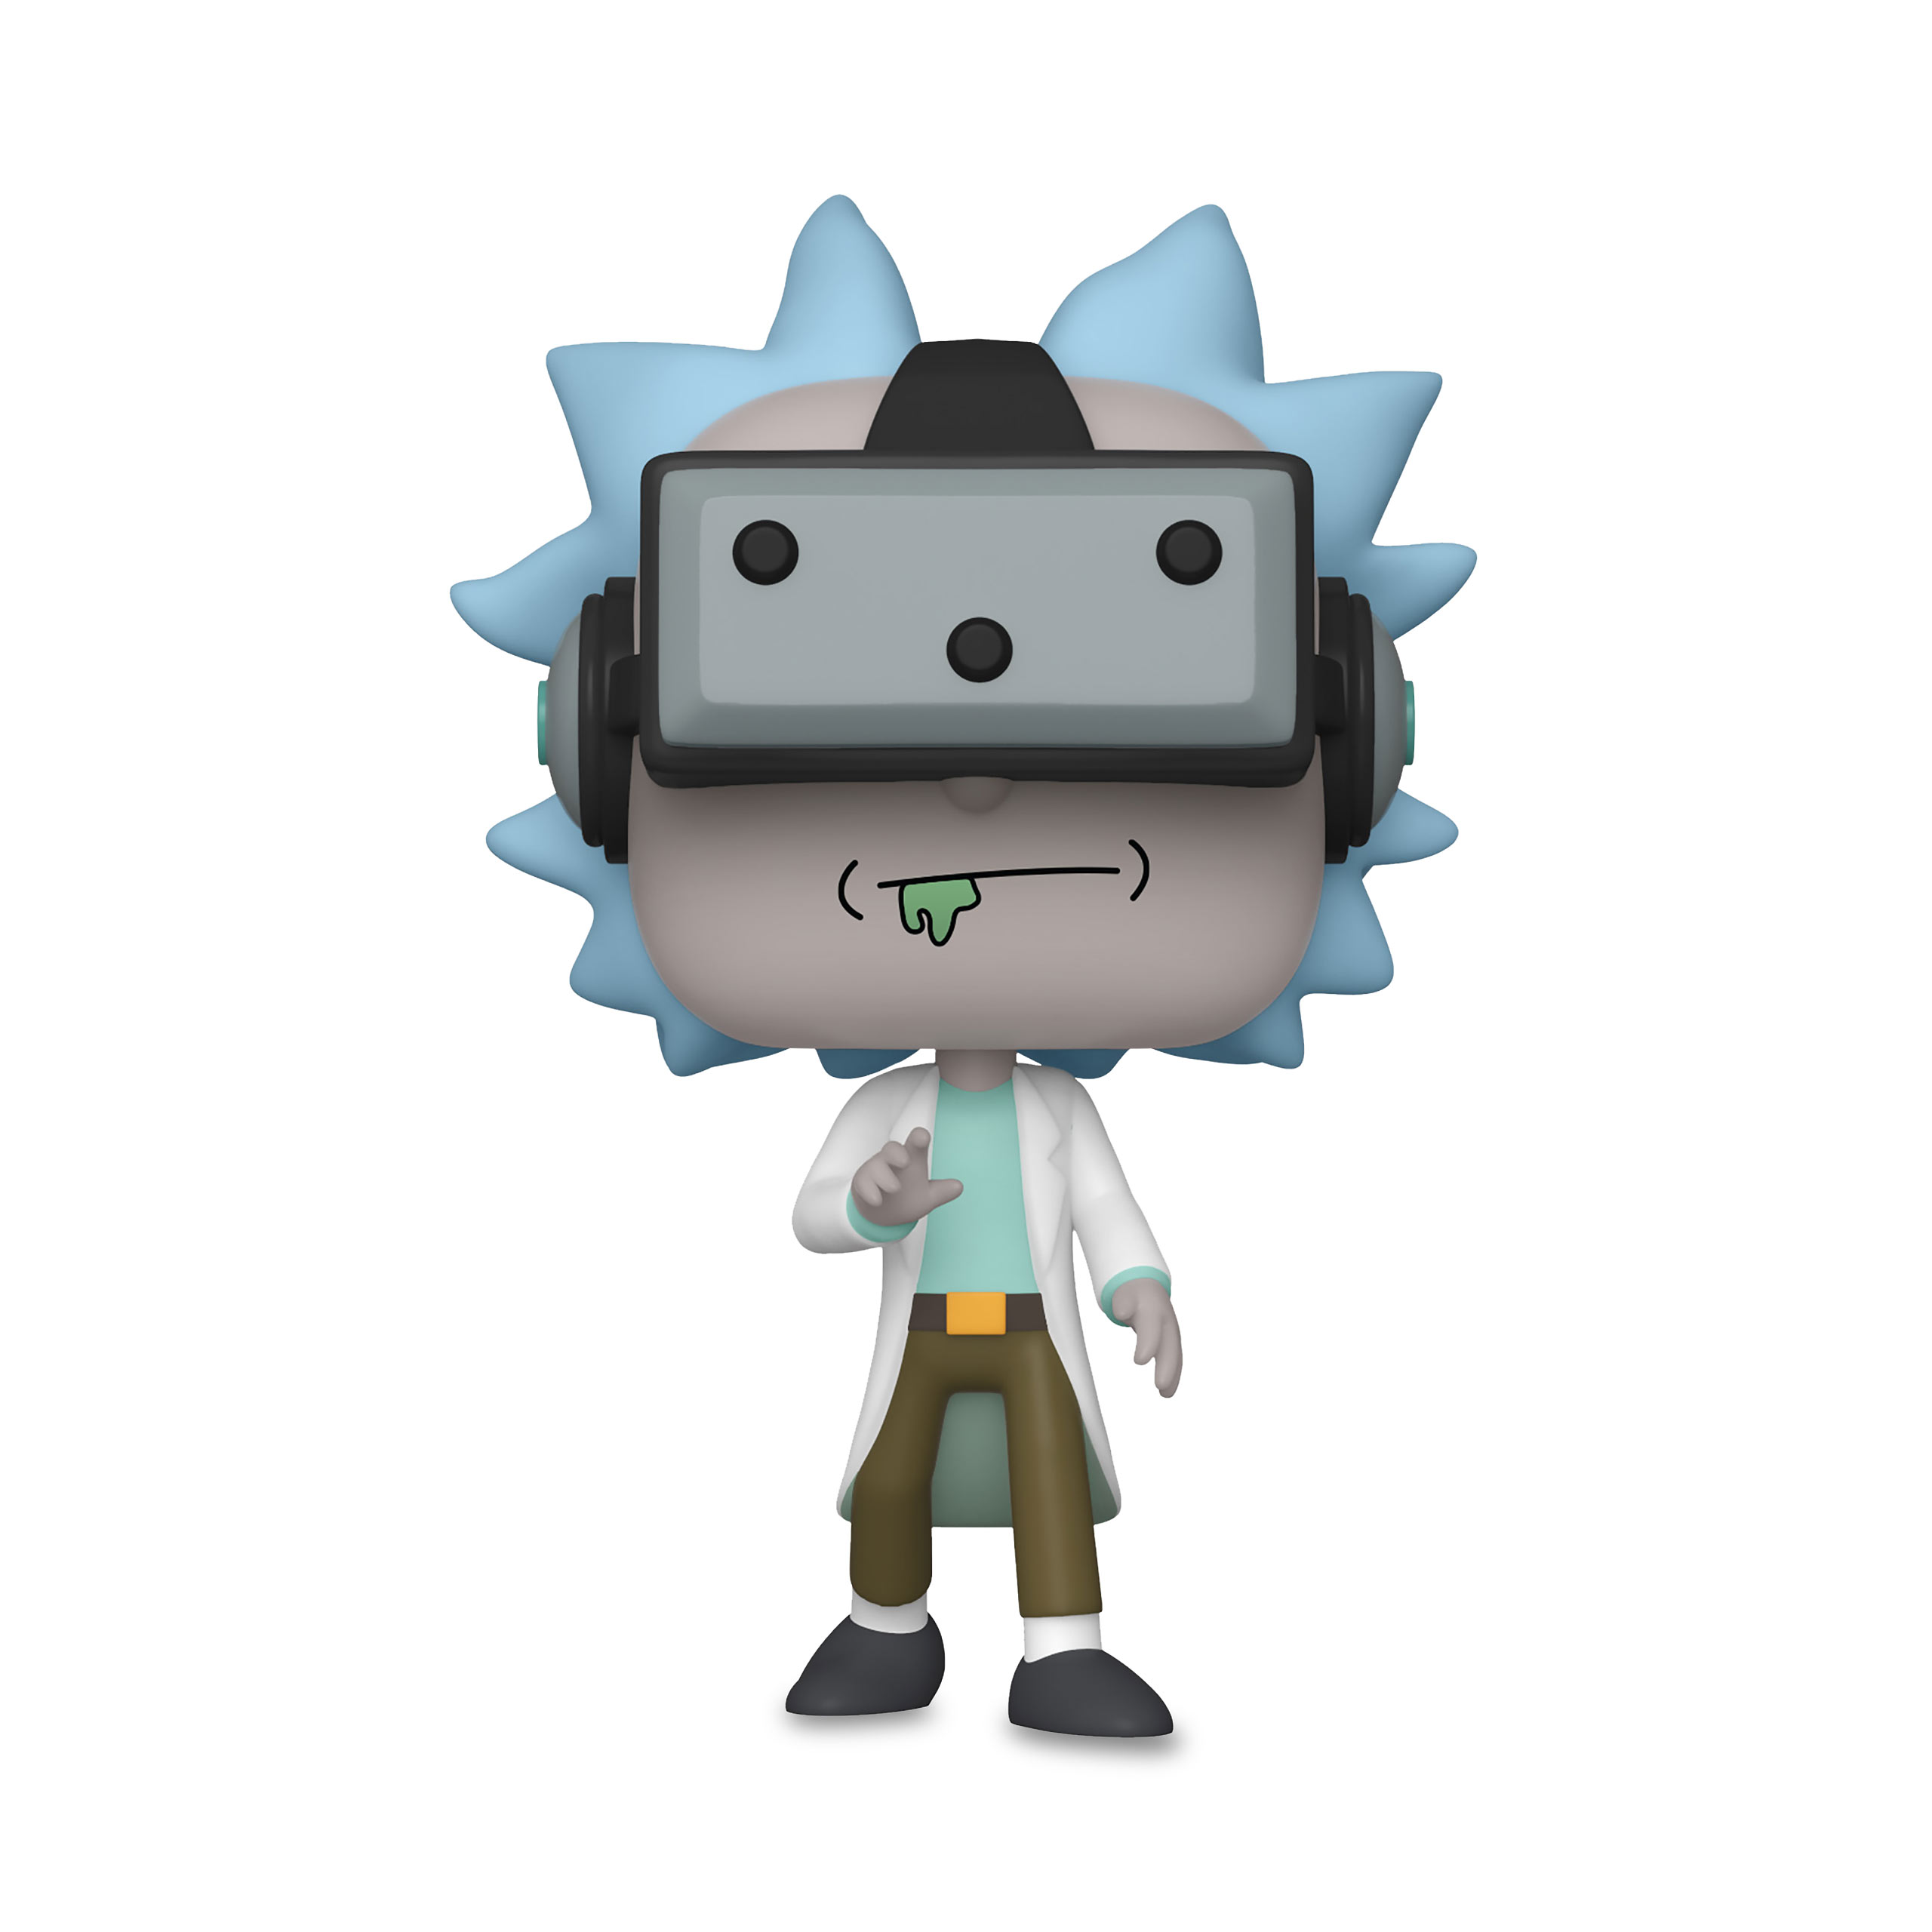 Rick and Morty - Gamer Rick Funko Pop Figuur